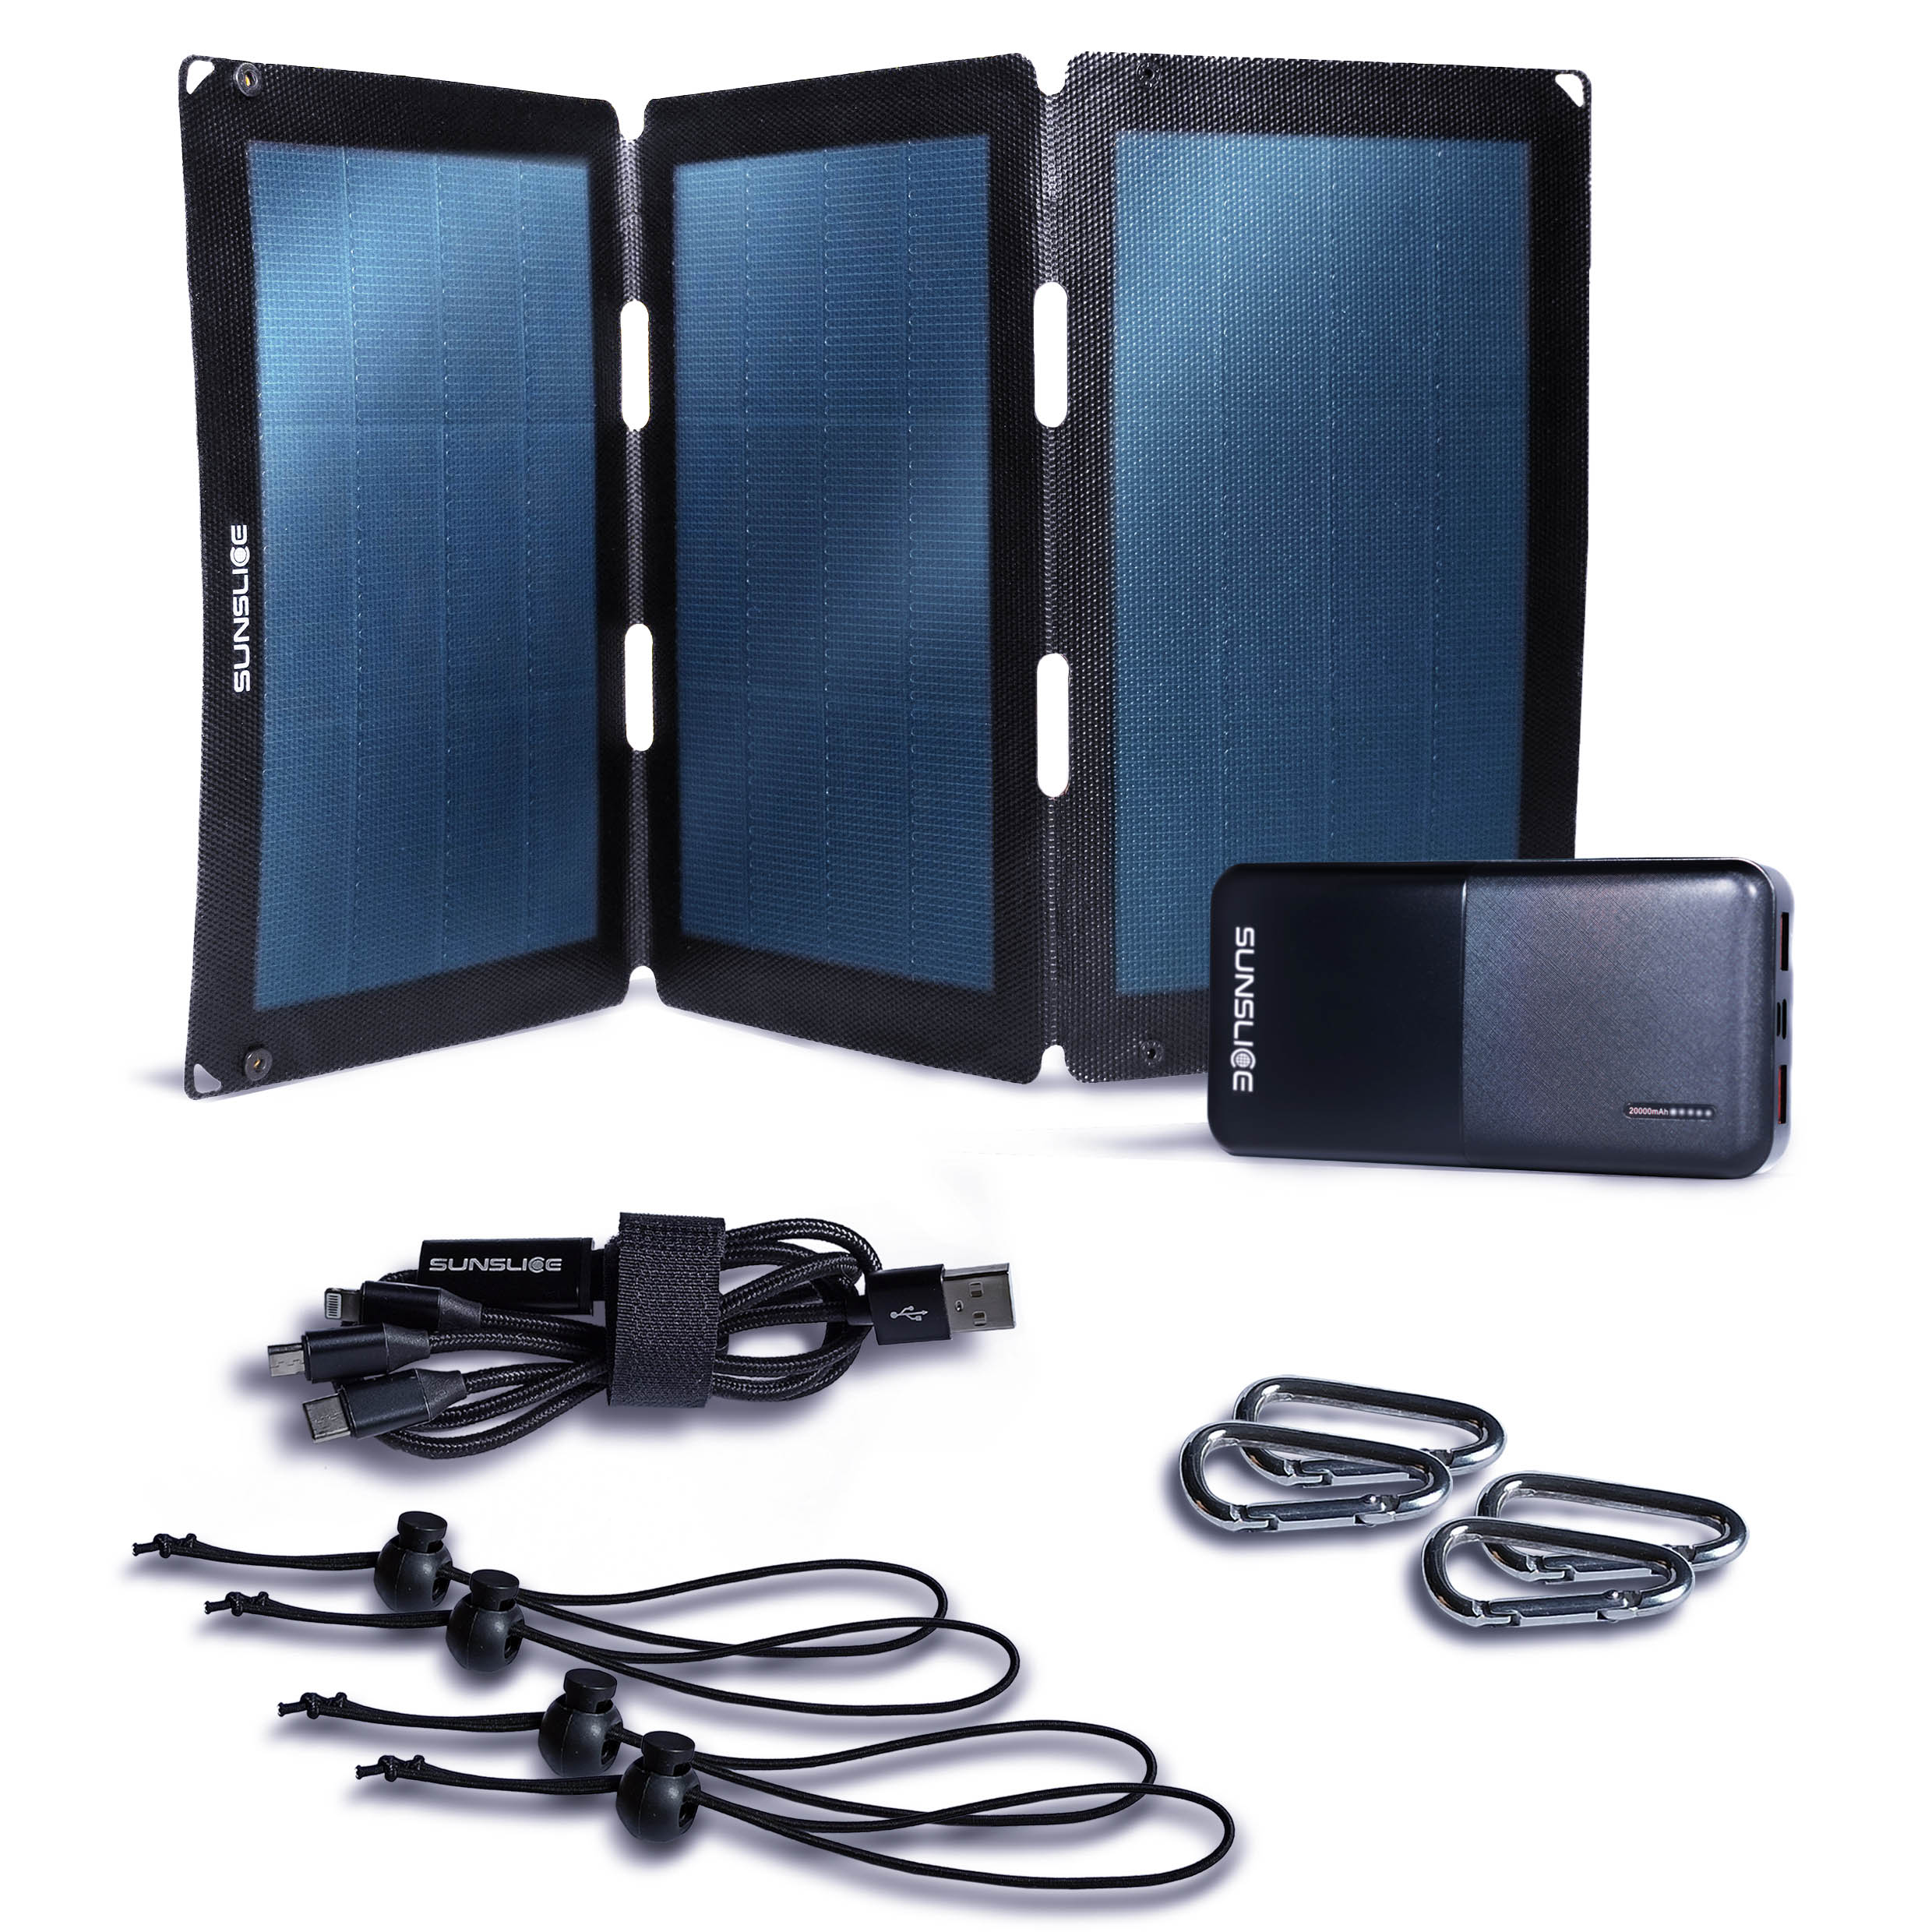 Fusion FLEX 24 Watts - Portable Solar Panel - Sunslice on white background and a gravity powerbank